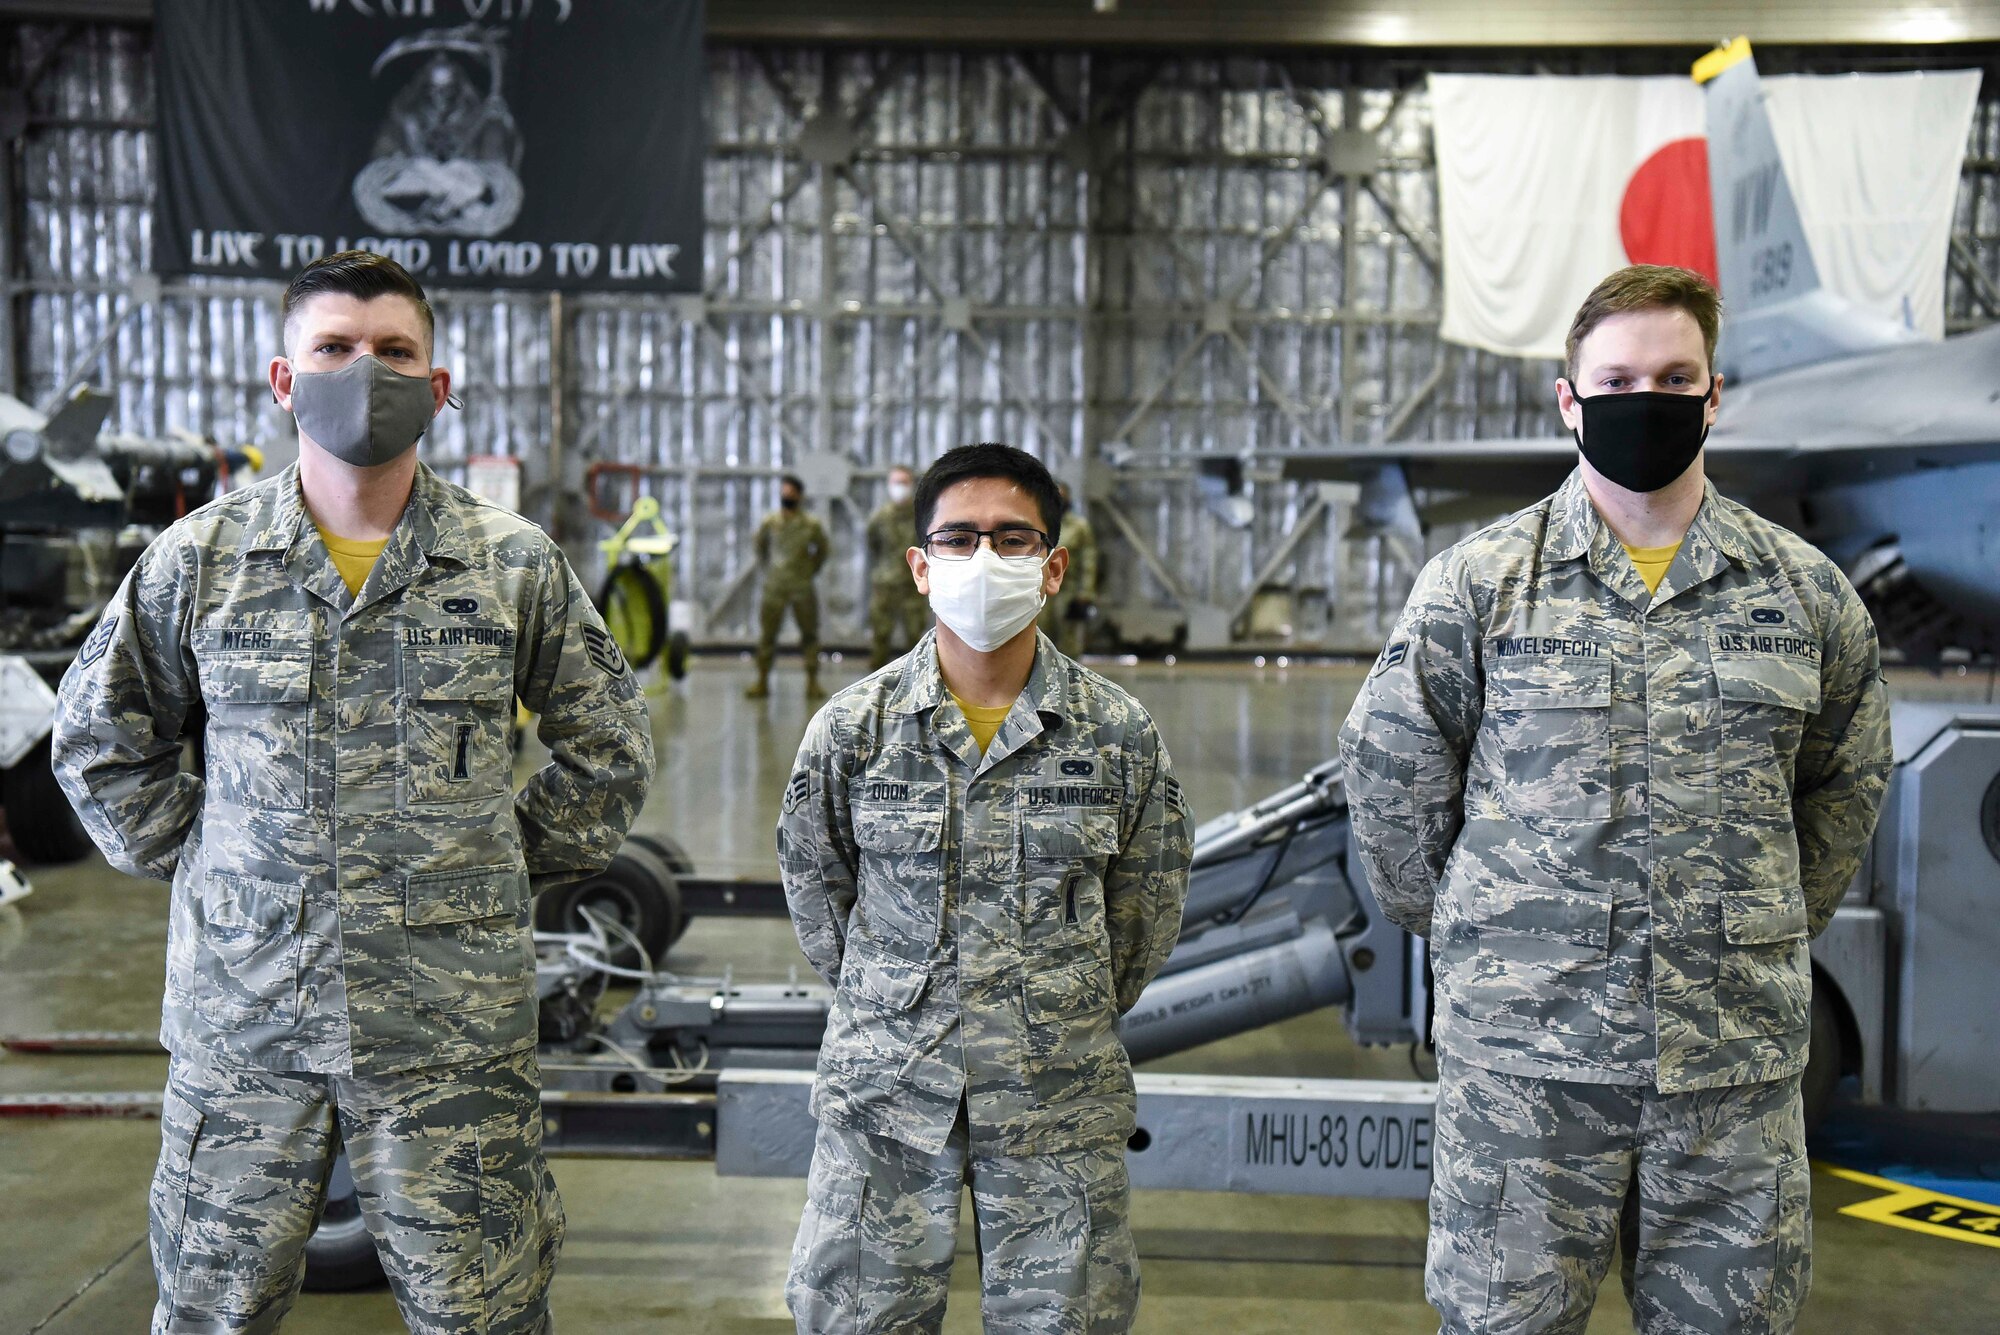 .S. Air Force Staff Sgt. Kevin Myers, a weapons load team chief, Senior Airman Victor Odom and Airman 1st Class Austin Winkelspecht, weapons load team members, all with the 14th Aircraft Maintanence Unit, stand in front of the F-16 Fighting Falcon they will equip in the fourth quarter load compitition at Misawa Air Base, Japan, March 19, 2021.